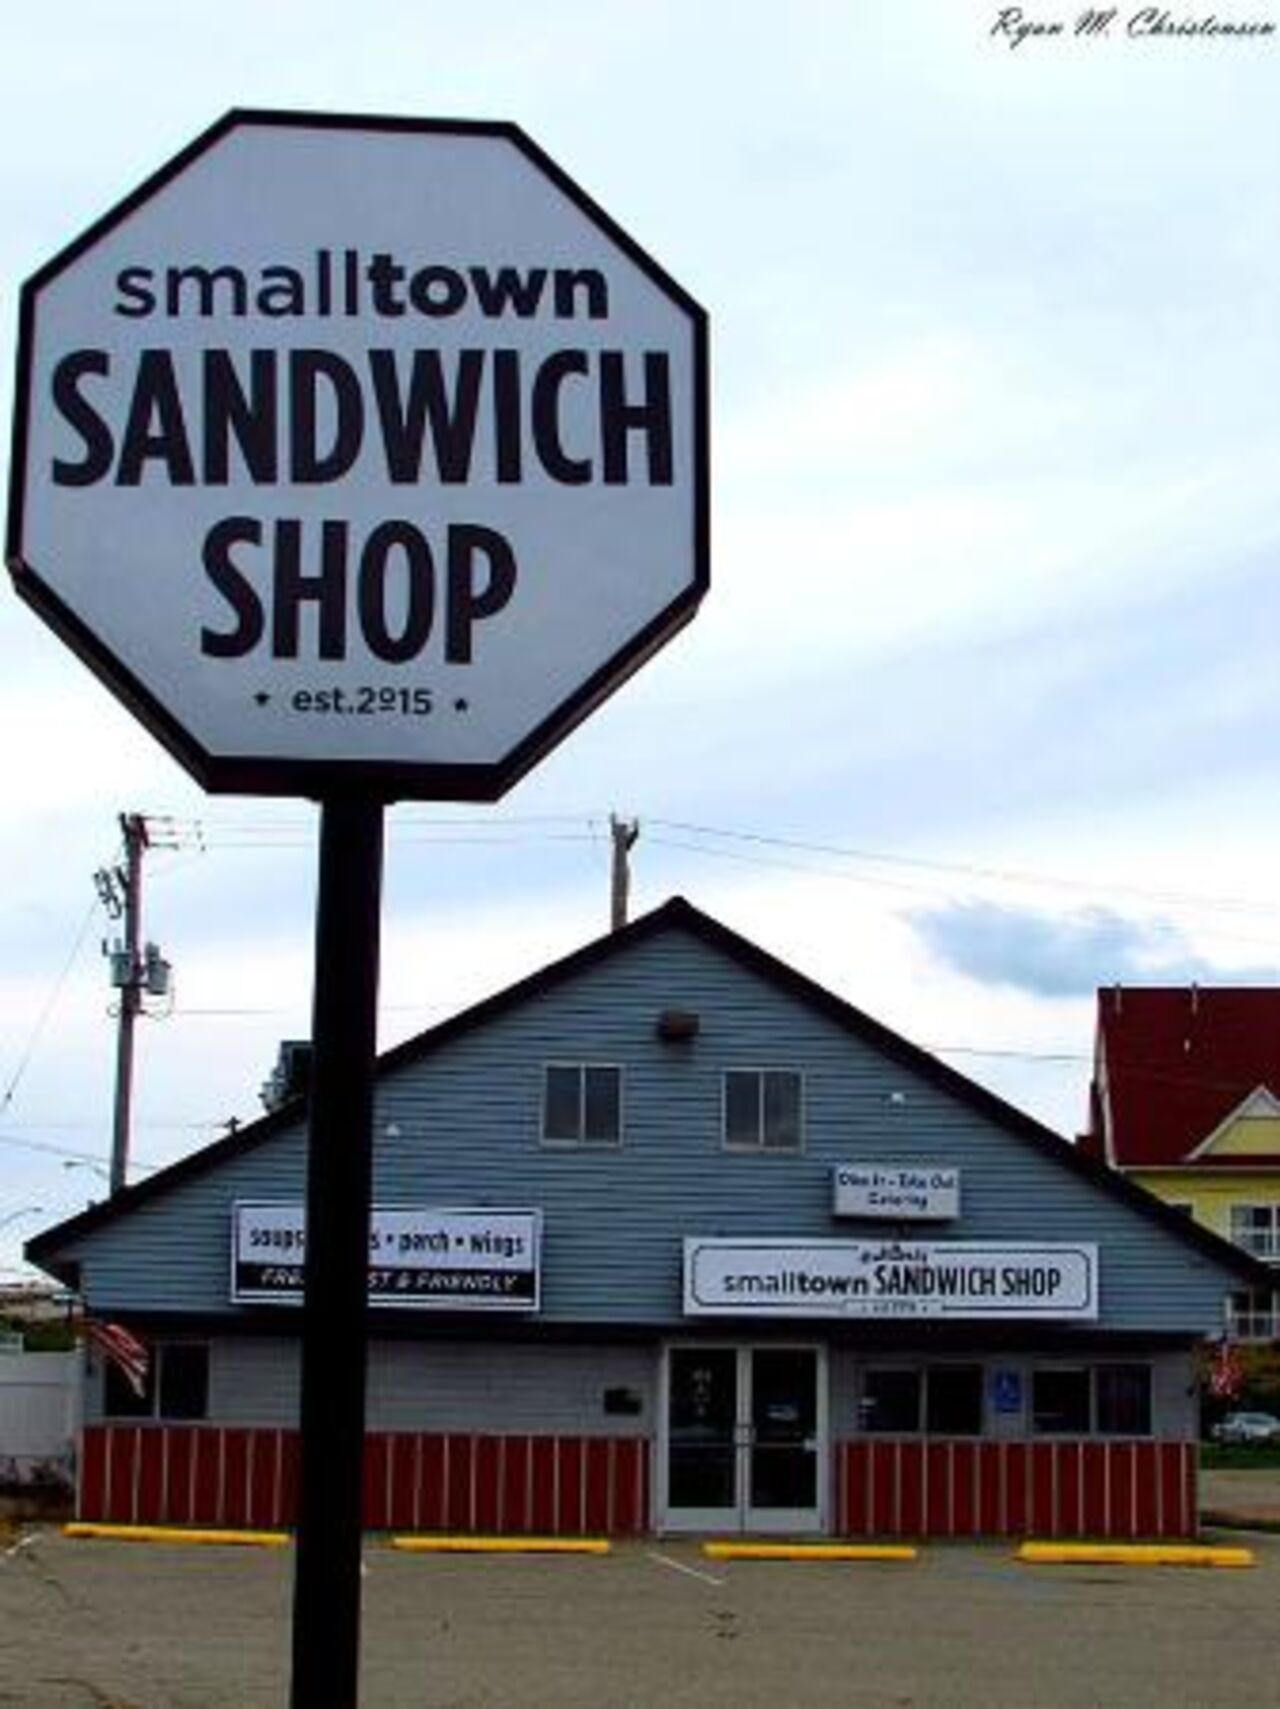 A photo of Small Town Sandwich Shop